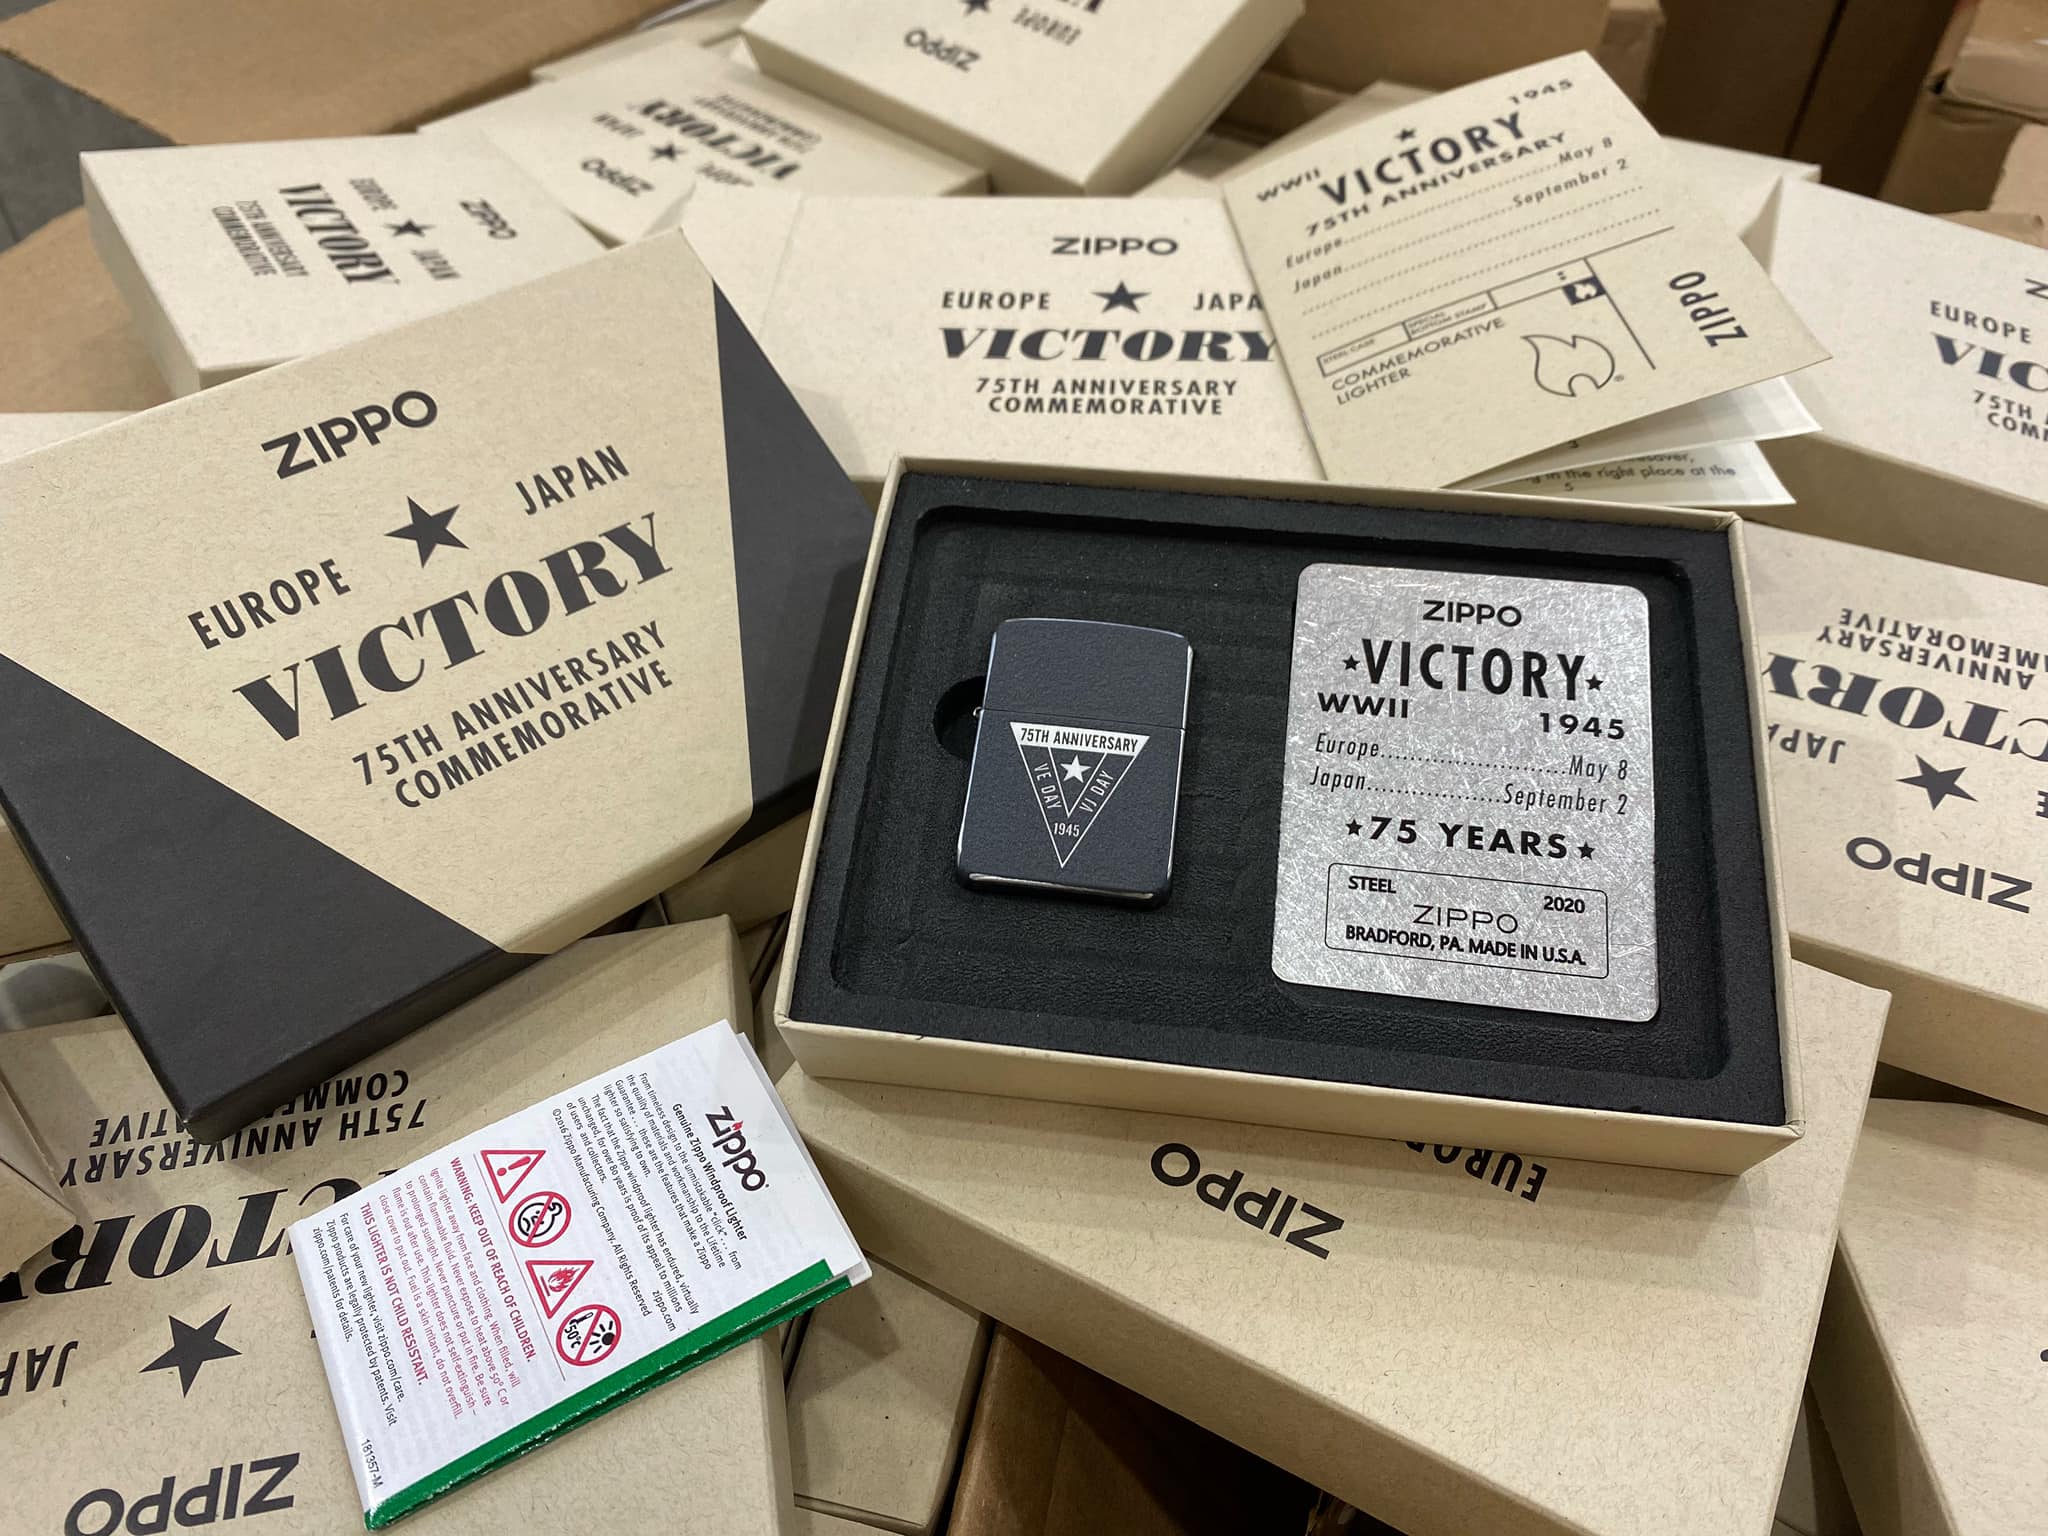 Zippo VE/VJ 75th Anniversary Collectible Steel Case - Zippo Victory in Europe & Japan Collectible Lighter - Zippo 49264 10